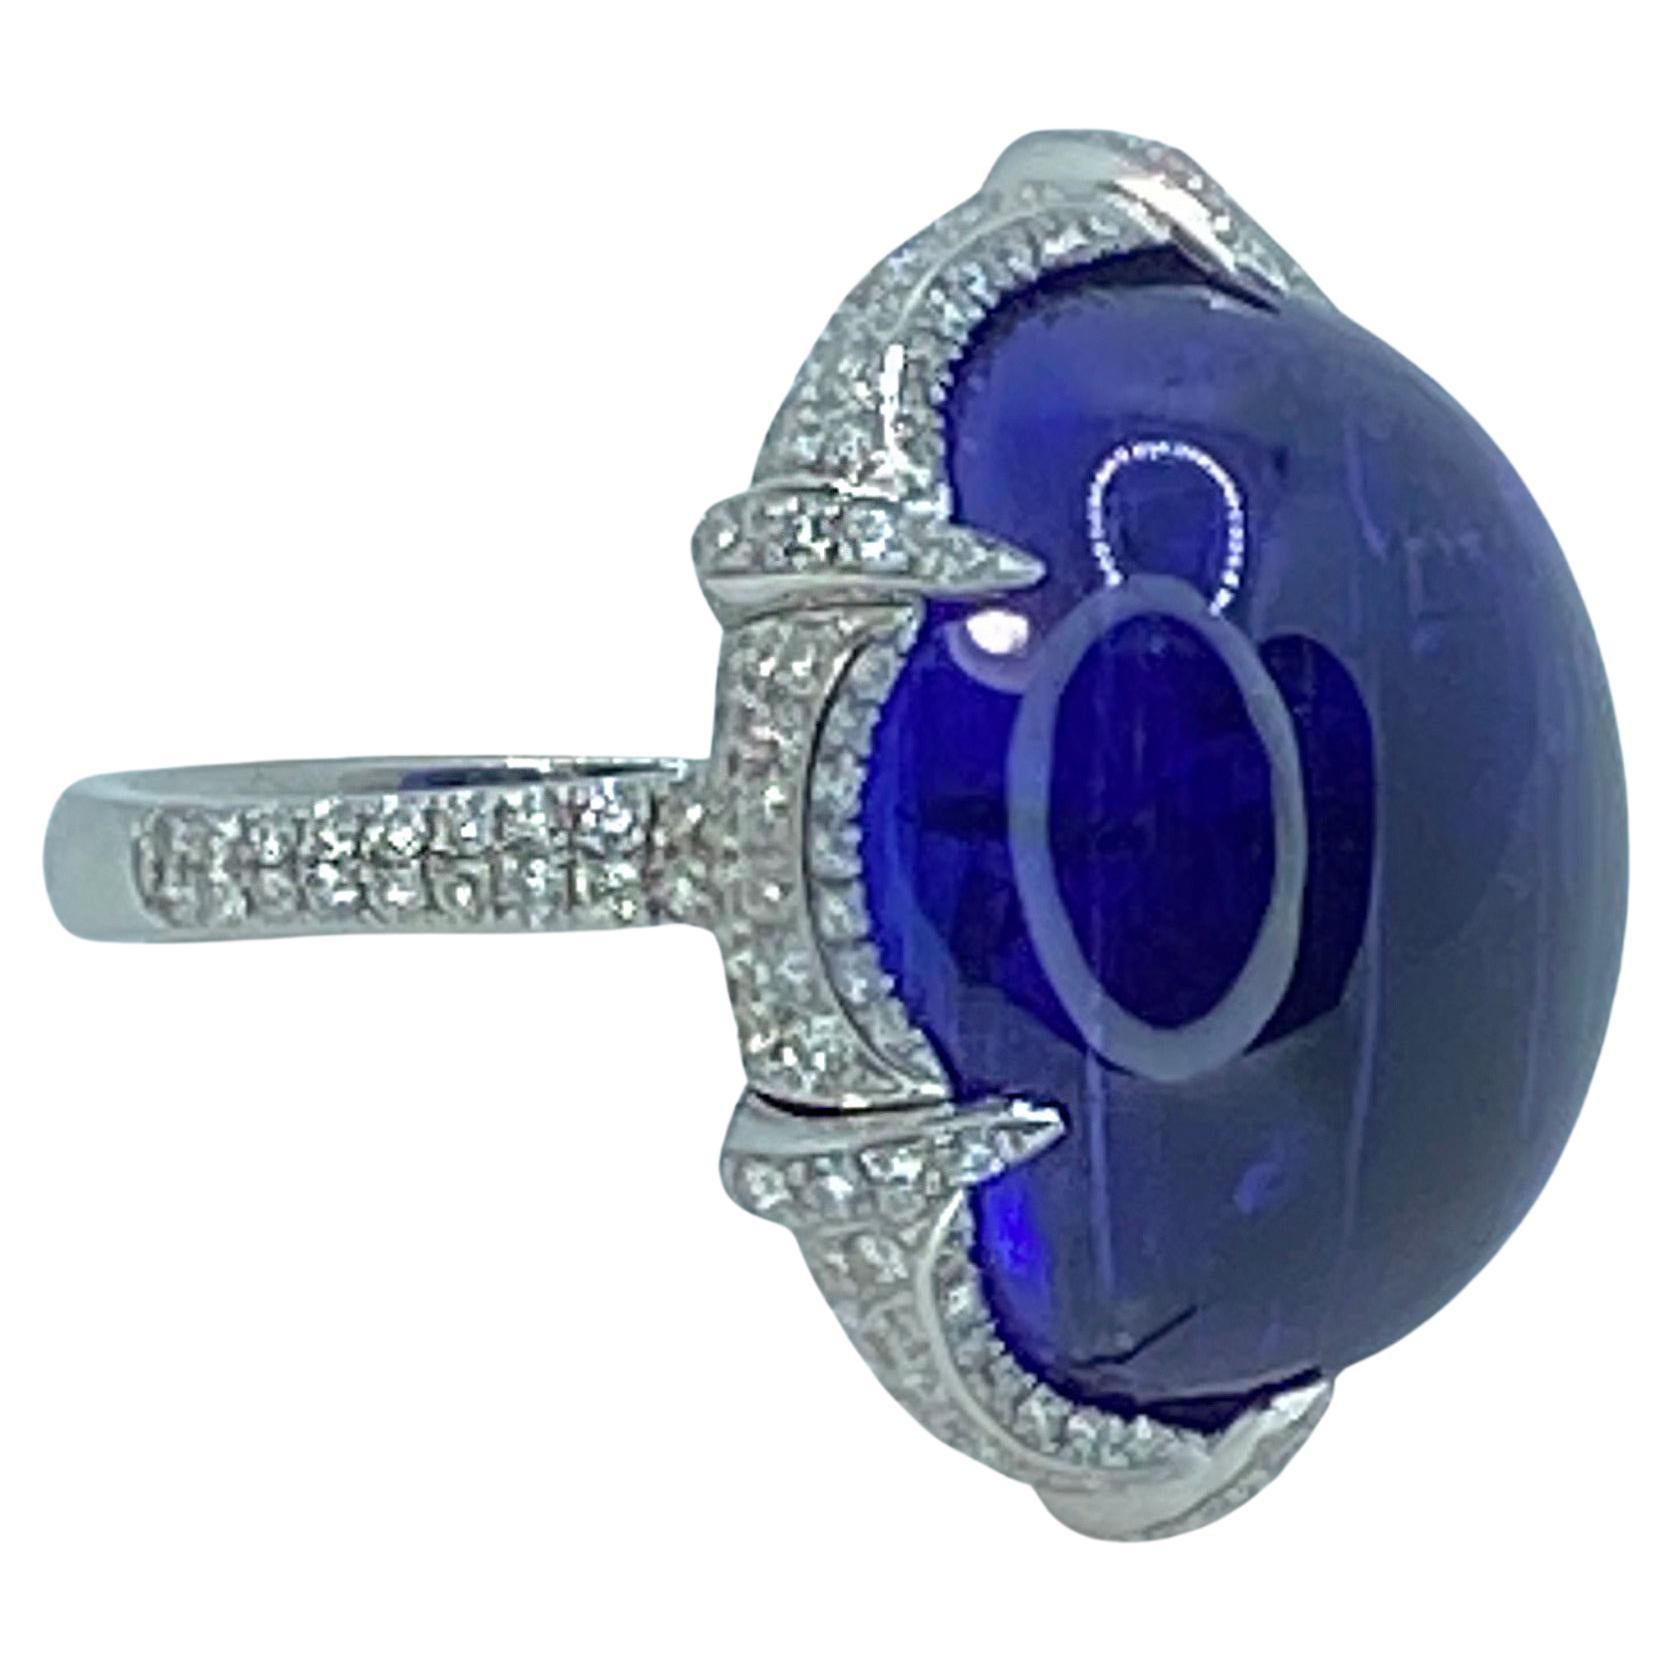 S.Georgios designer solitaire cabochon Ring is all hand-made in White Gold 18 Karat. This beautiful unique ring features a solitaire natural cabochon cut Tanzanite with a weight of 37.7 Carat and natural white brilliant cut diamonds total weight of